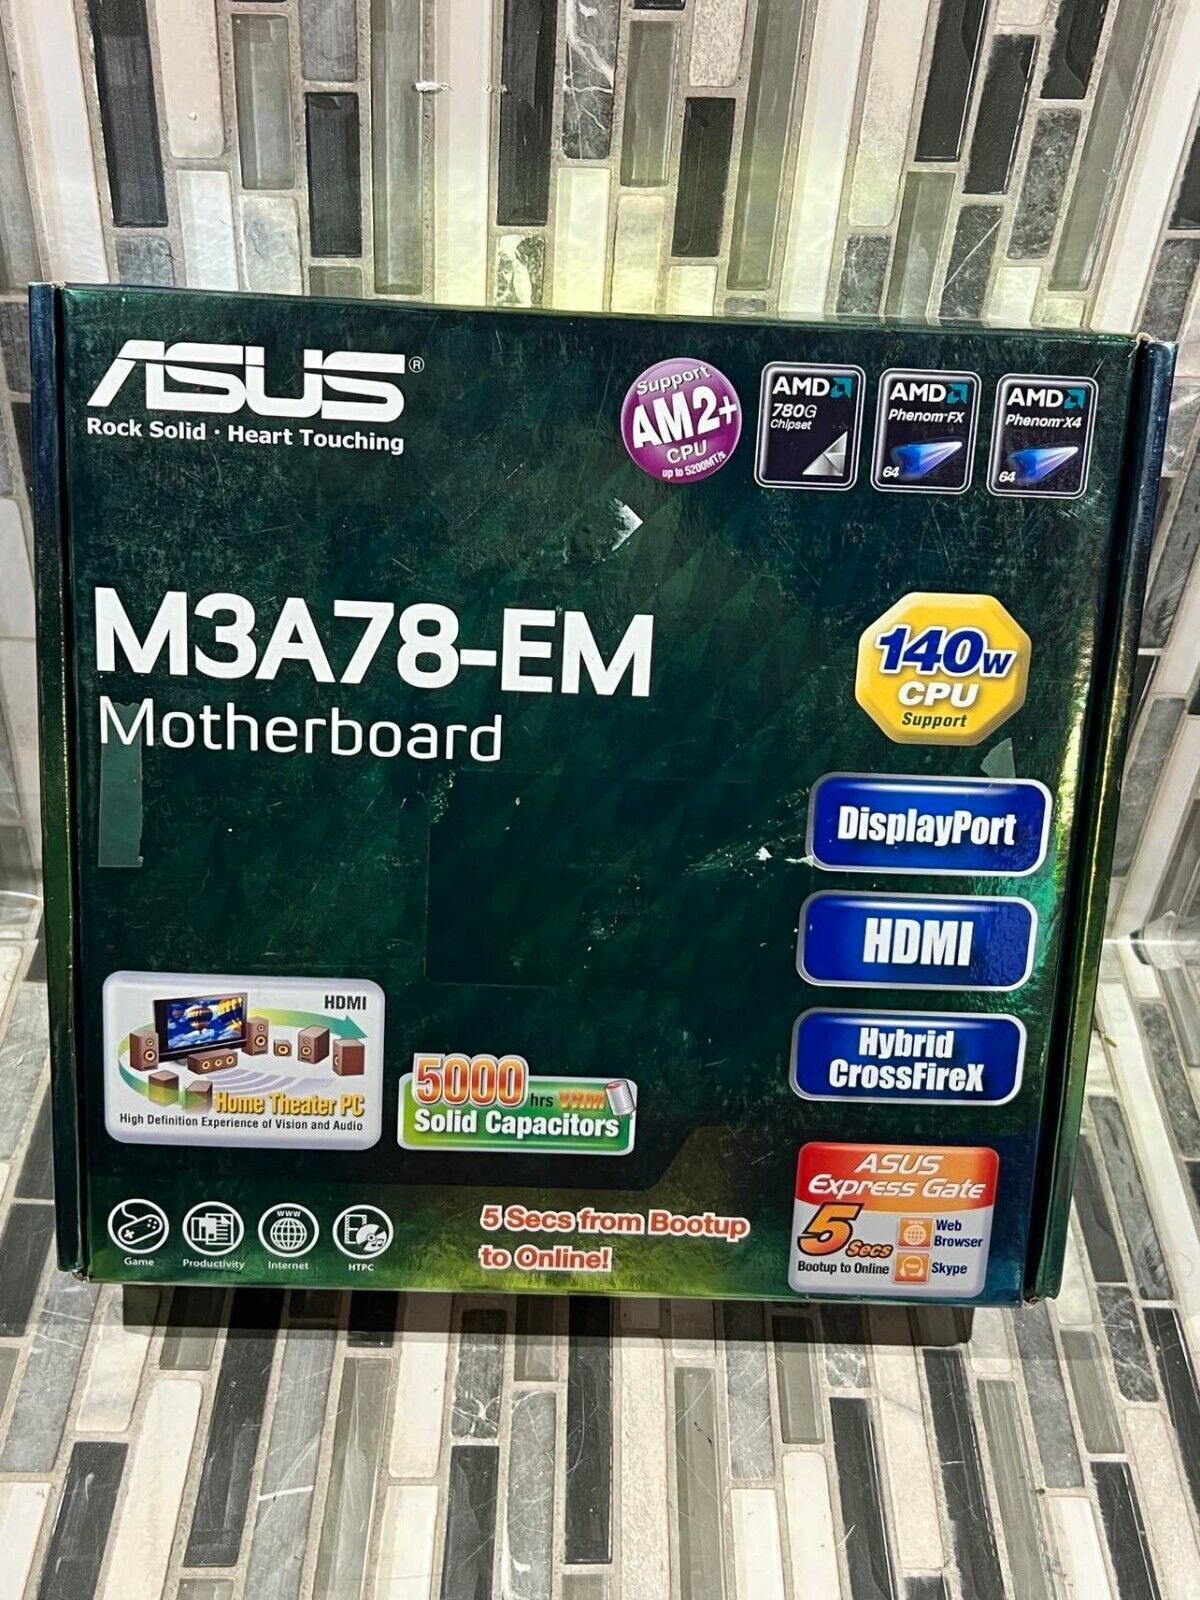 ASUS M3A78-EM AM2+ AMD 780G DDR2-1066 ATX Motherboard SOLD AS IS